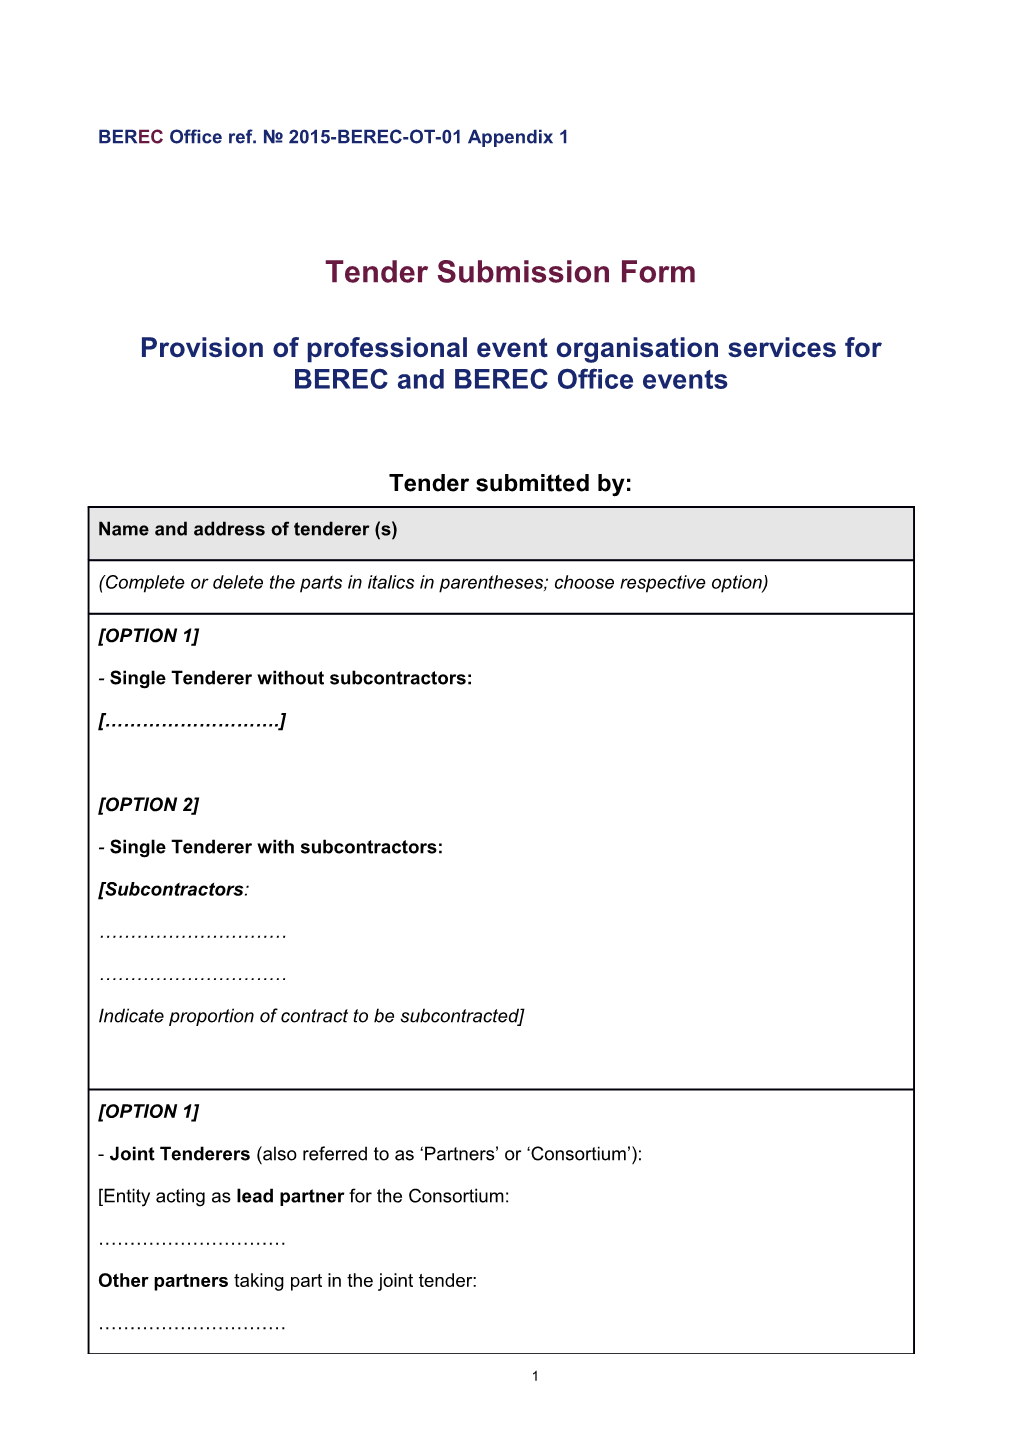 Tender Submission Form for the Provision of Professional Event Organisation Services For